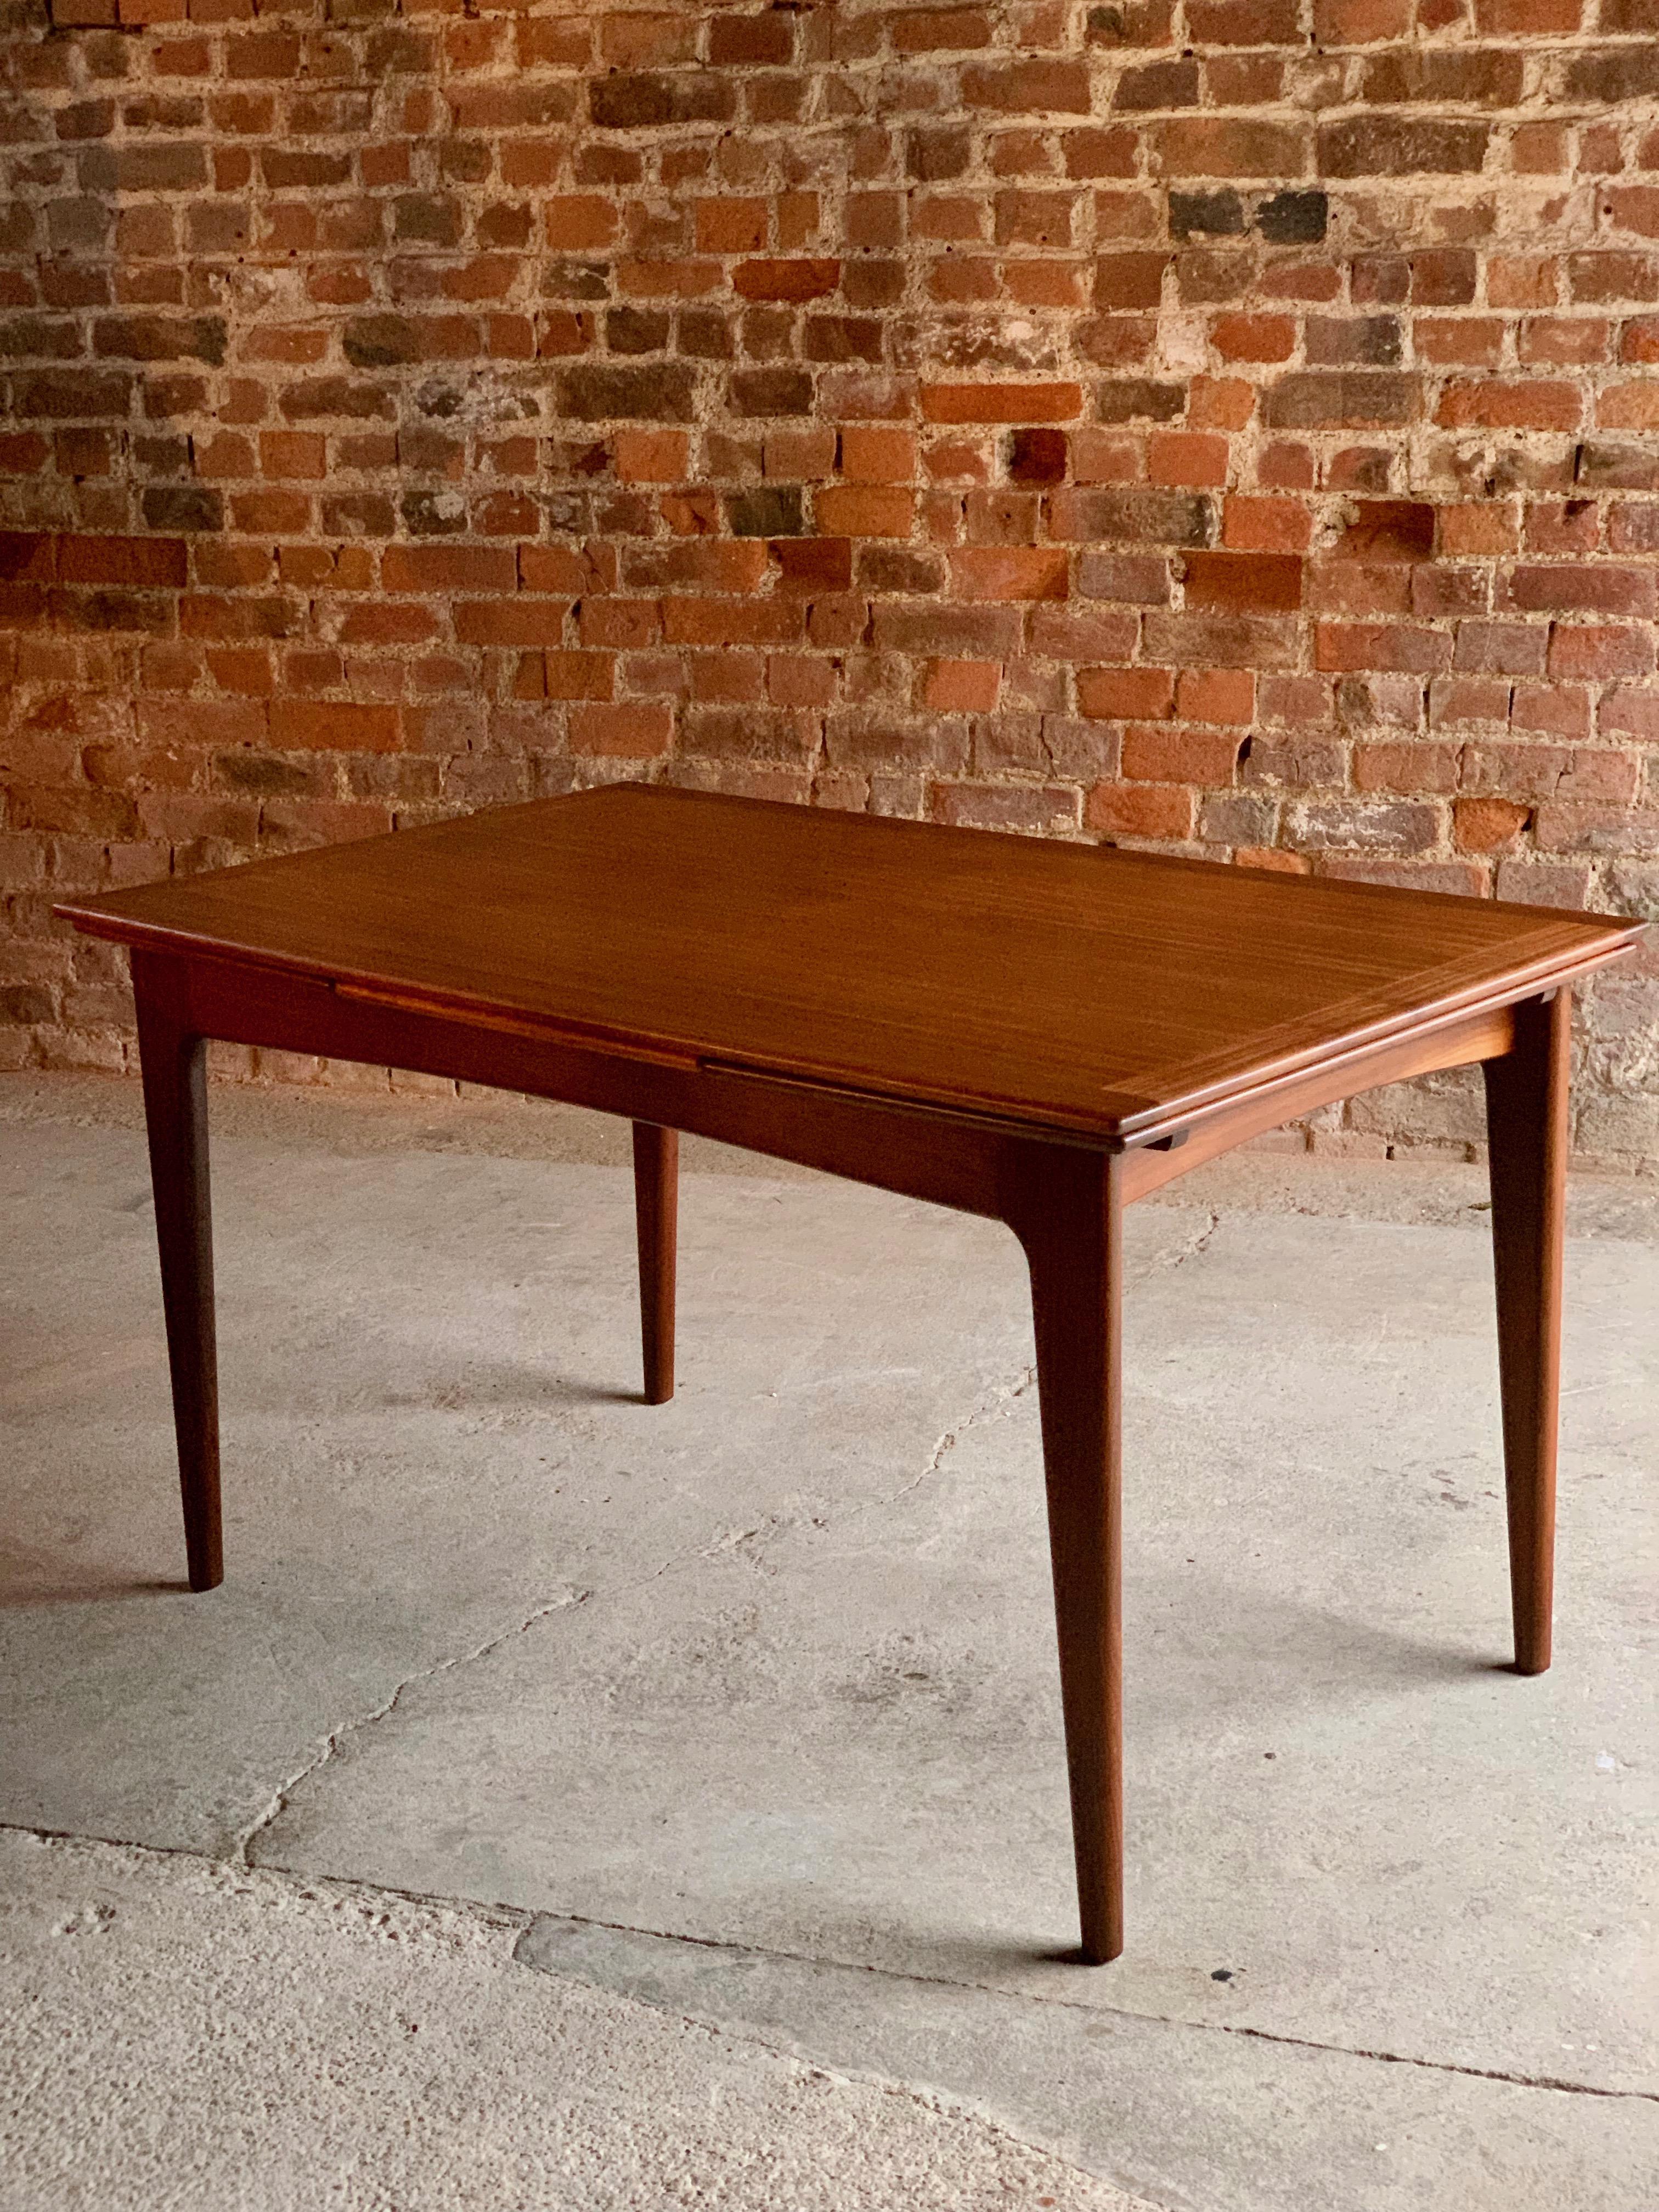 A magnificent midcentury teak extending dining table by Danish designer Niels Otto Møller, and manufactured by JL Møllers Møbelfabrik circa 1960, this table has been completely refurbished and is offered as new, the table has two leaves that